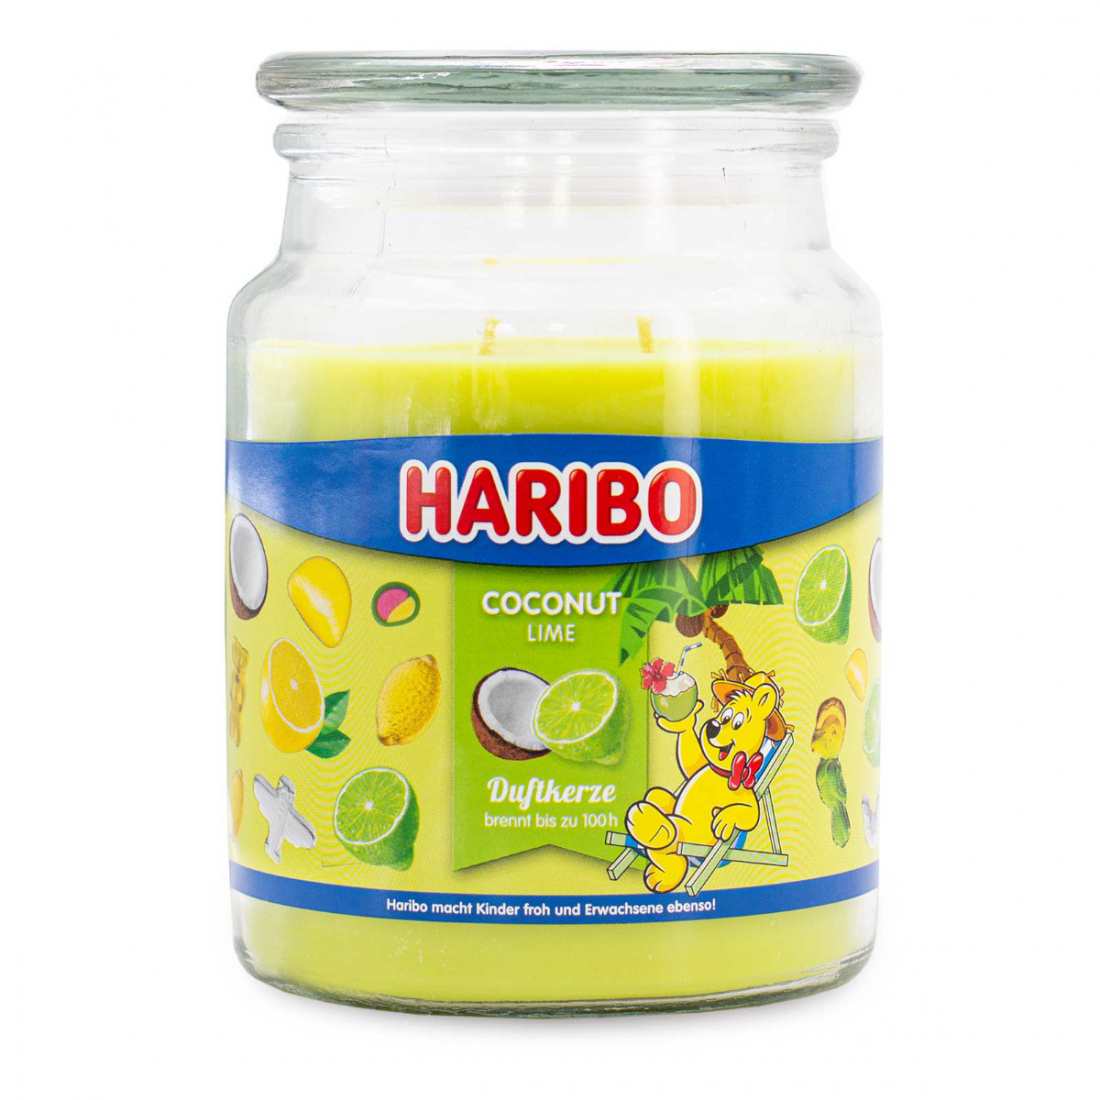 Bougie 2 mèches 'Haribo Coconut Lime' - 510 g